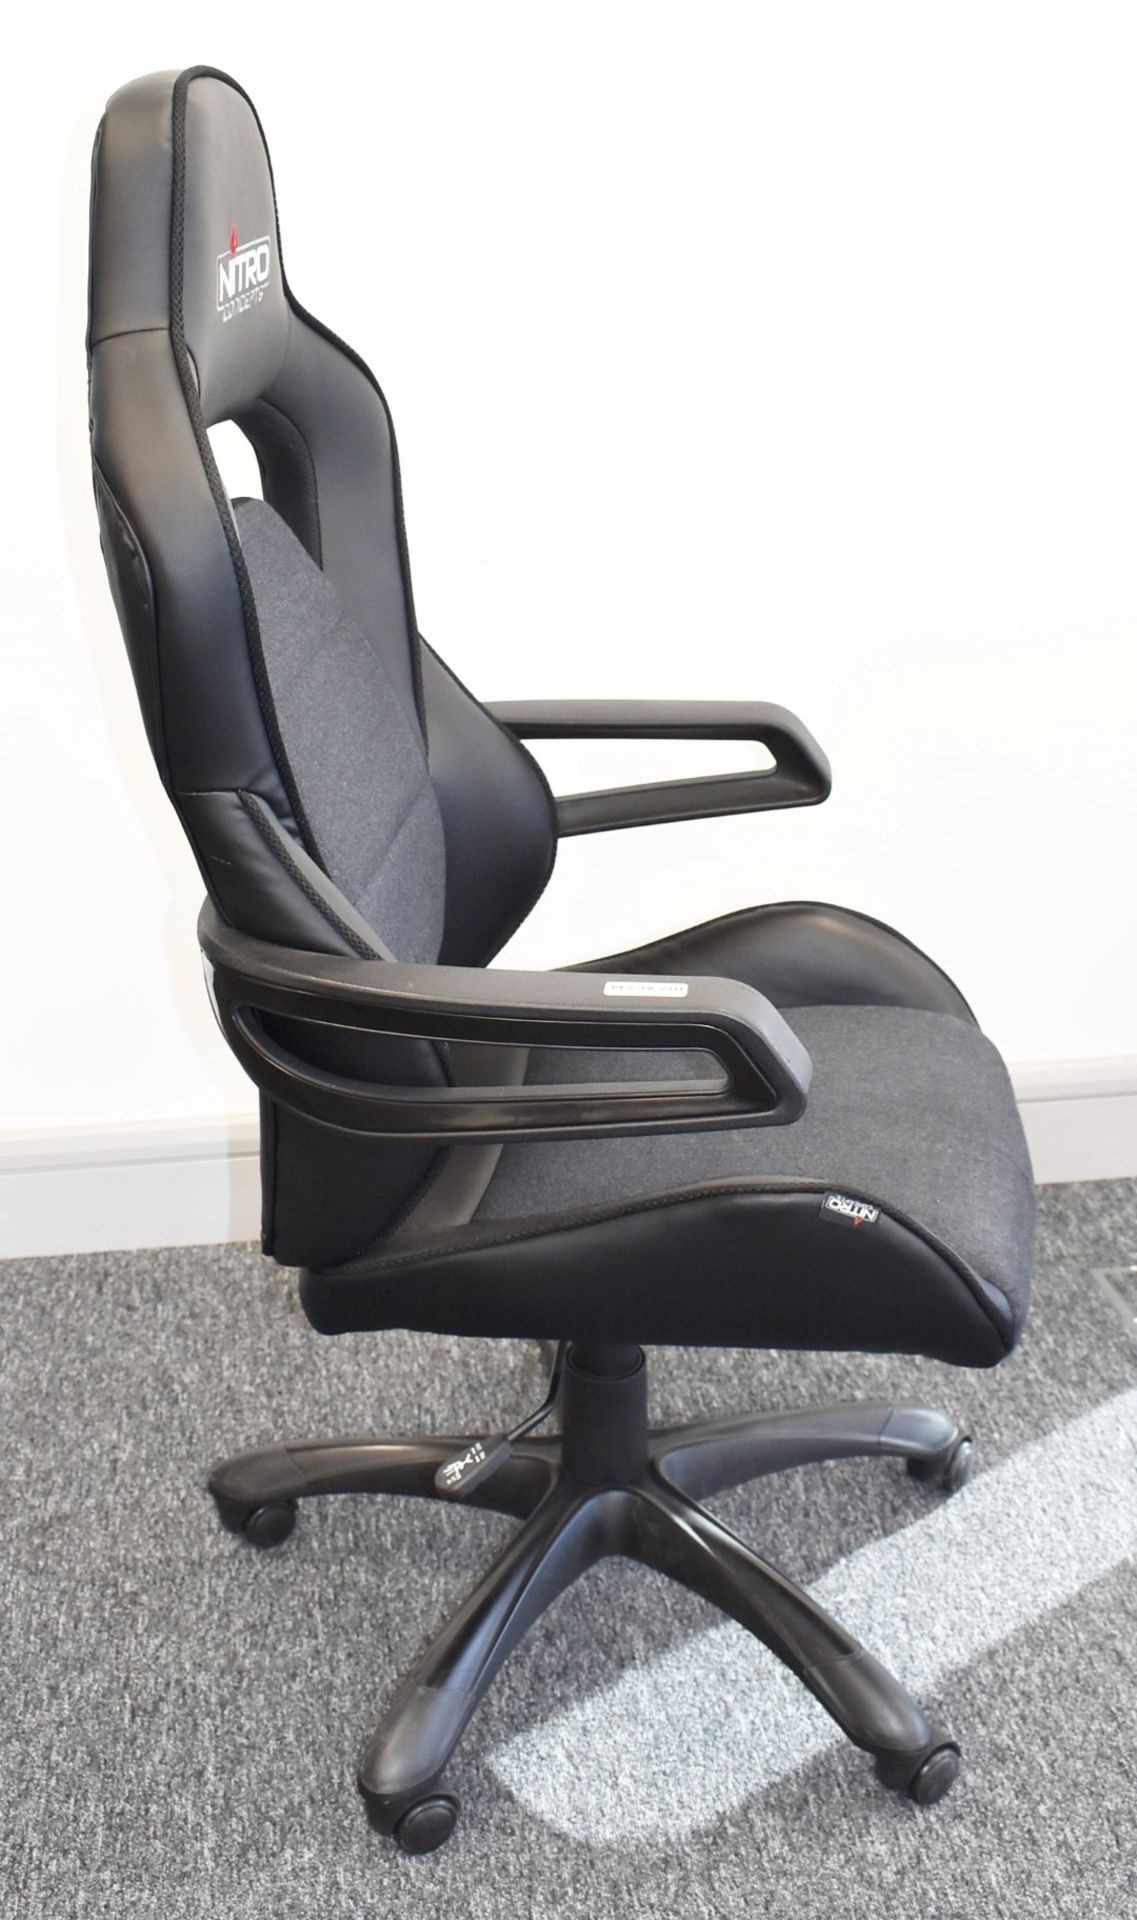 1 x Nitro Concepts Evo Gaming Swivel Chair - Faux Leather and Fabric Upholstery in Black - Gas - Image 7 of 8